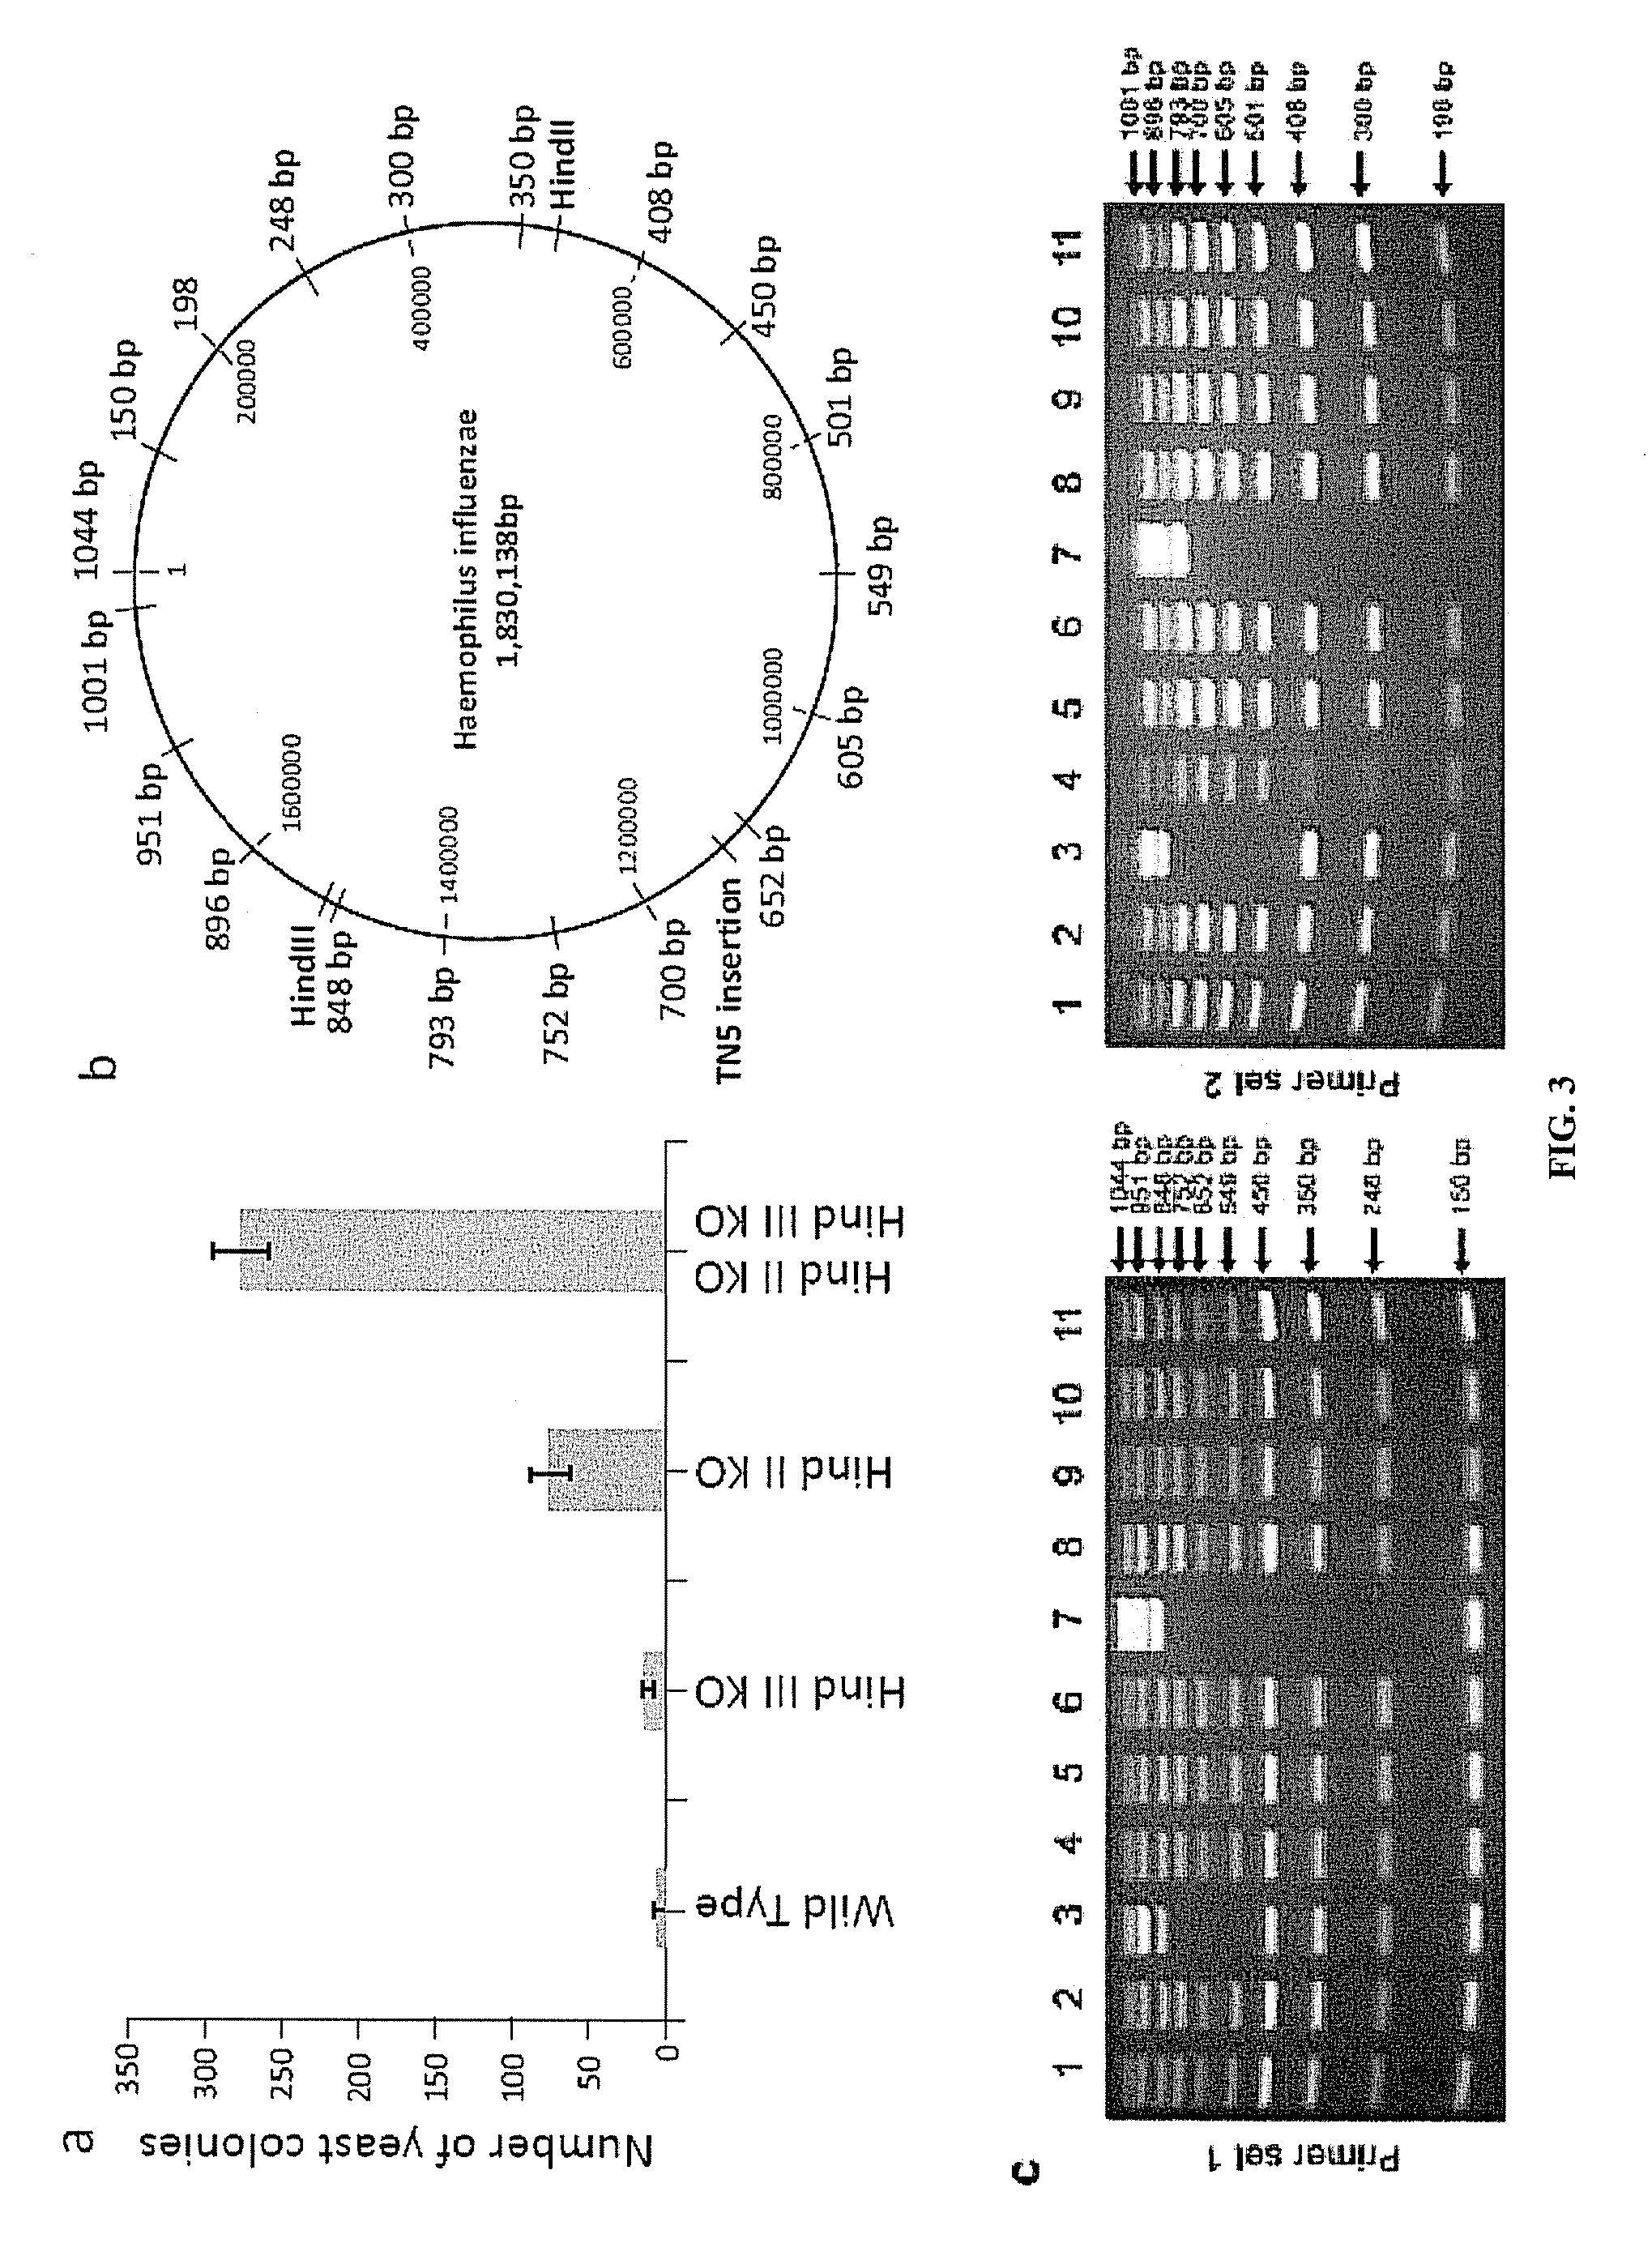 Crowding agent-induced nucleic acid transfer into a recipient host cell